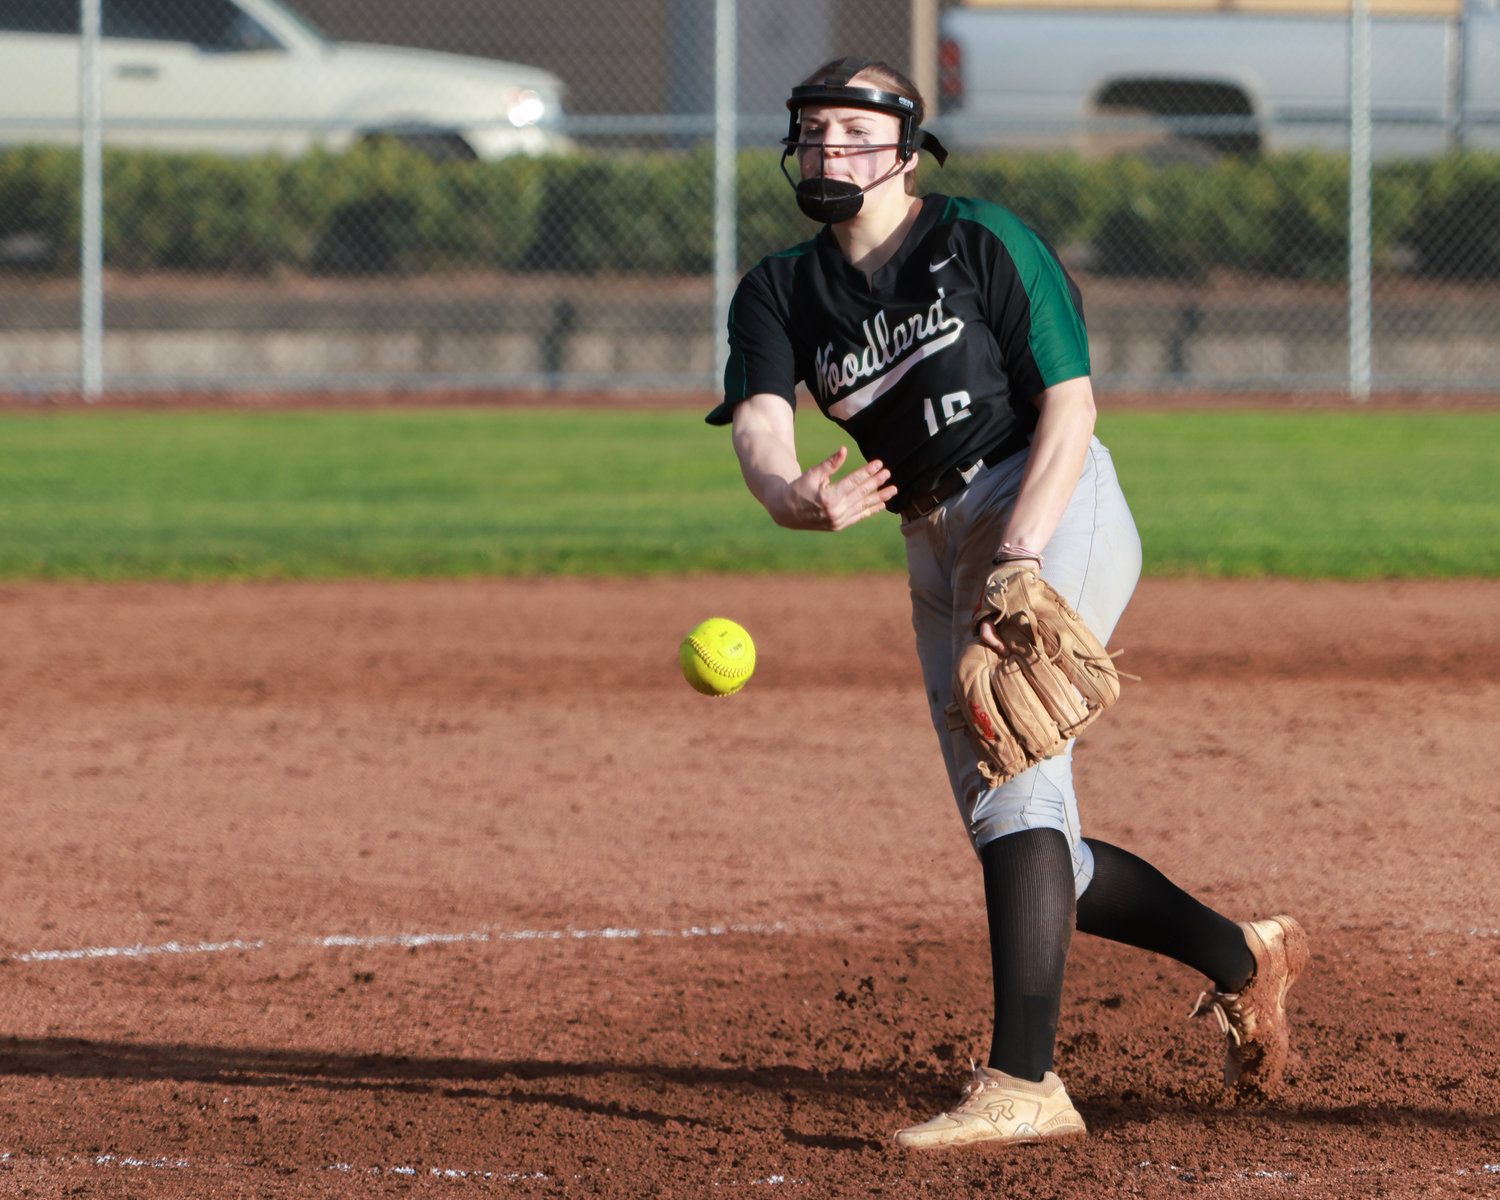 Woodland's Gabi Silveria throws a pitch during a game against Kelso on Wednesday, March 29.